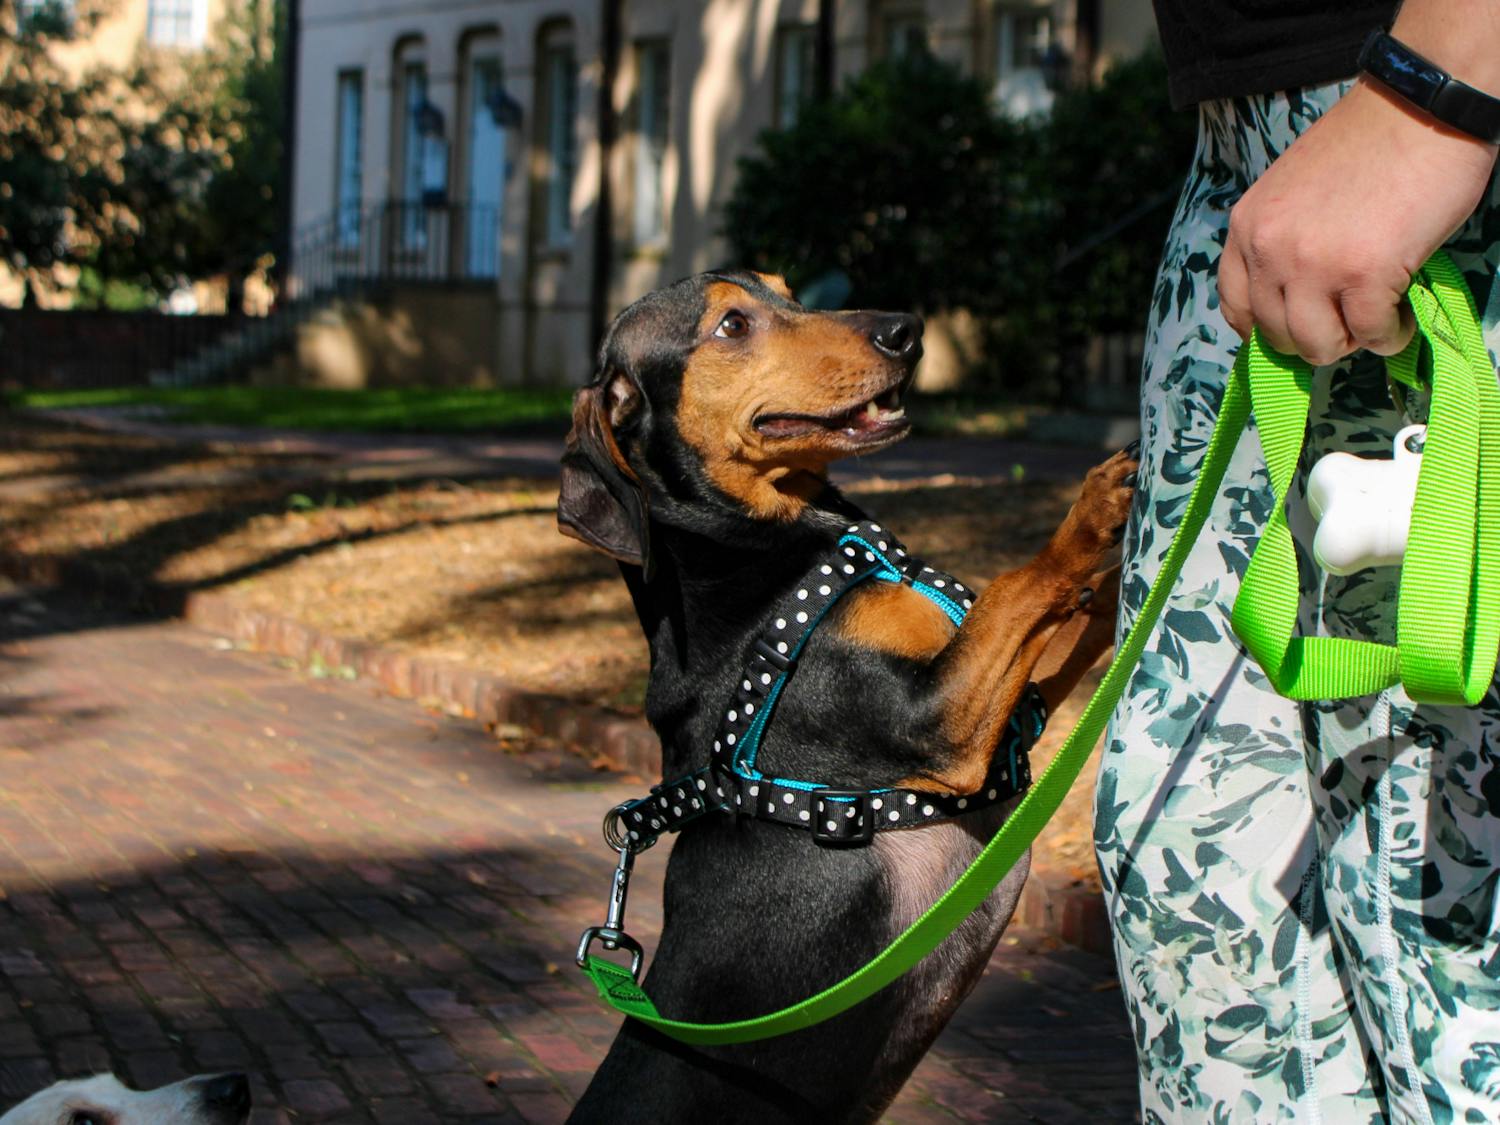 A black and brown dachshund greets its owner during a community dachshund walk held by Dachshunds of Columbia on Sept. 17, 2022. The Columbia dog-walking group gathered with their furry friends for a walk through USC's Horseshoe on Saturday morning.